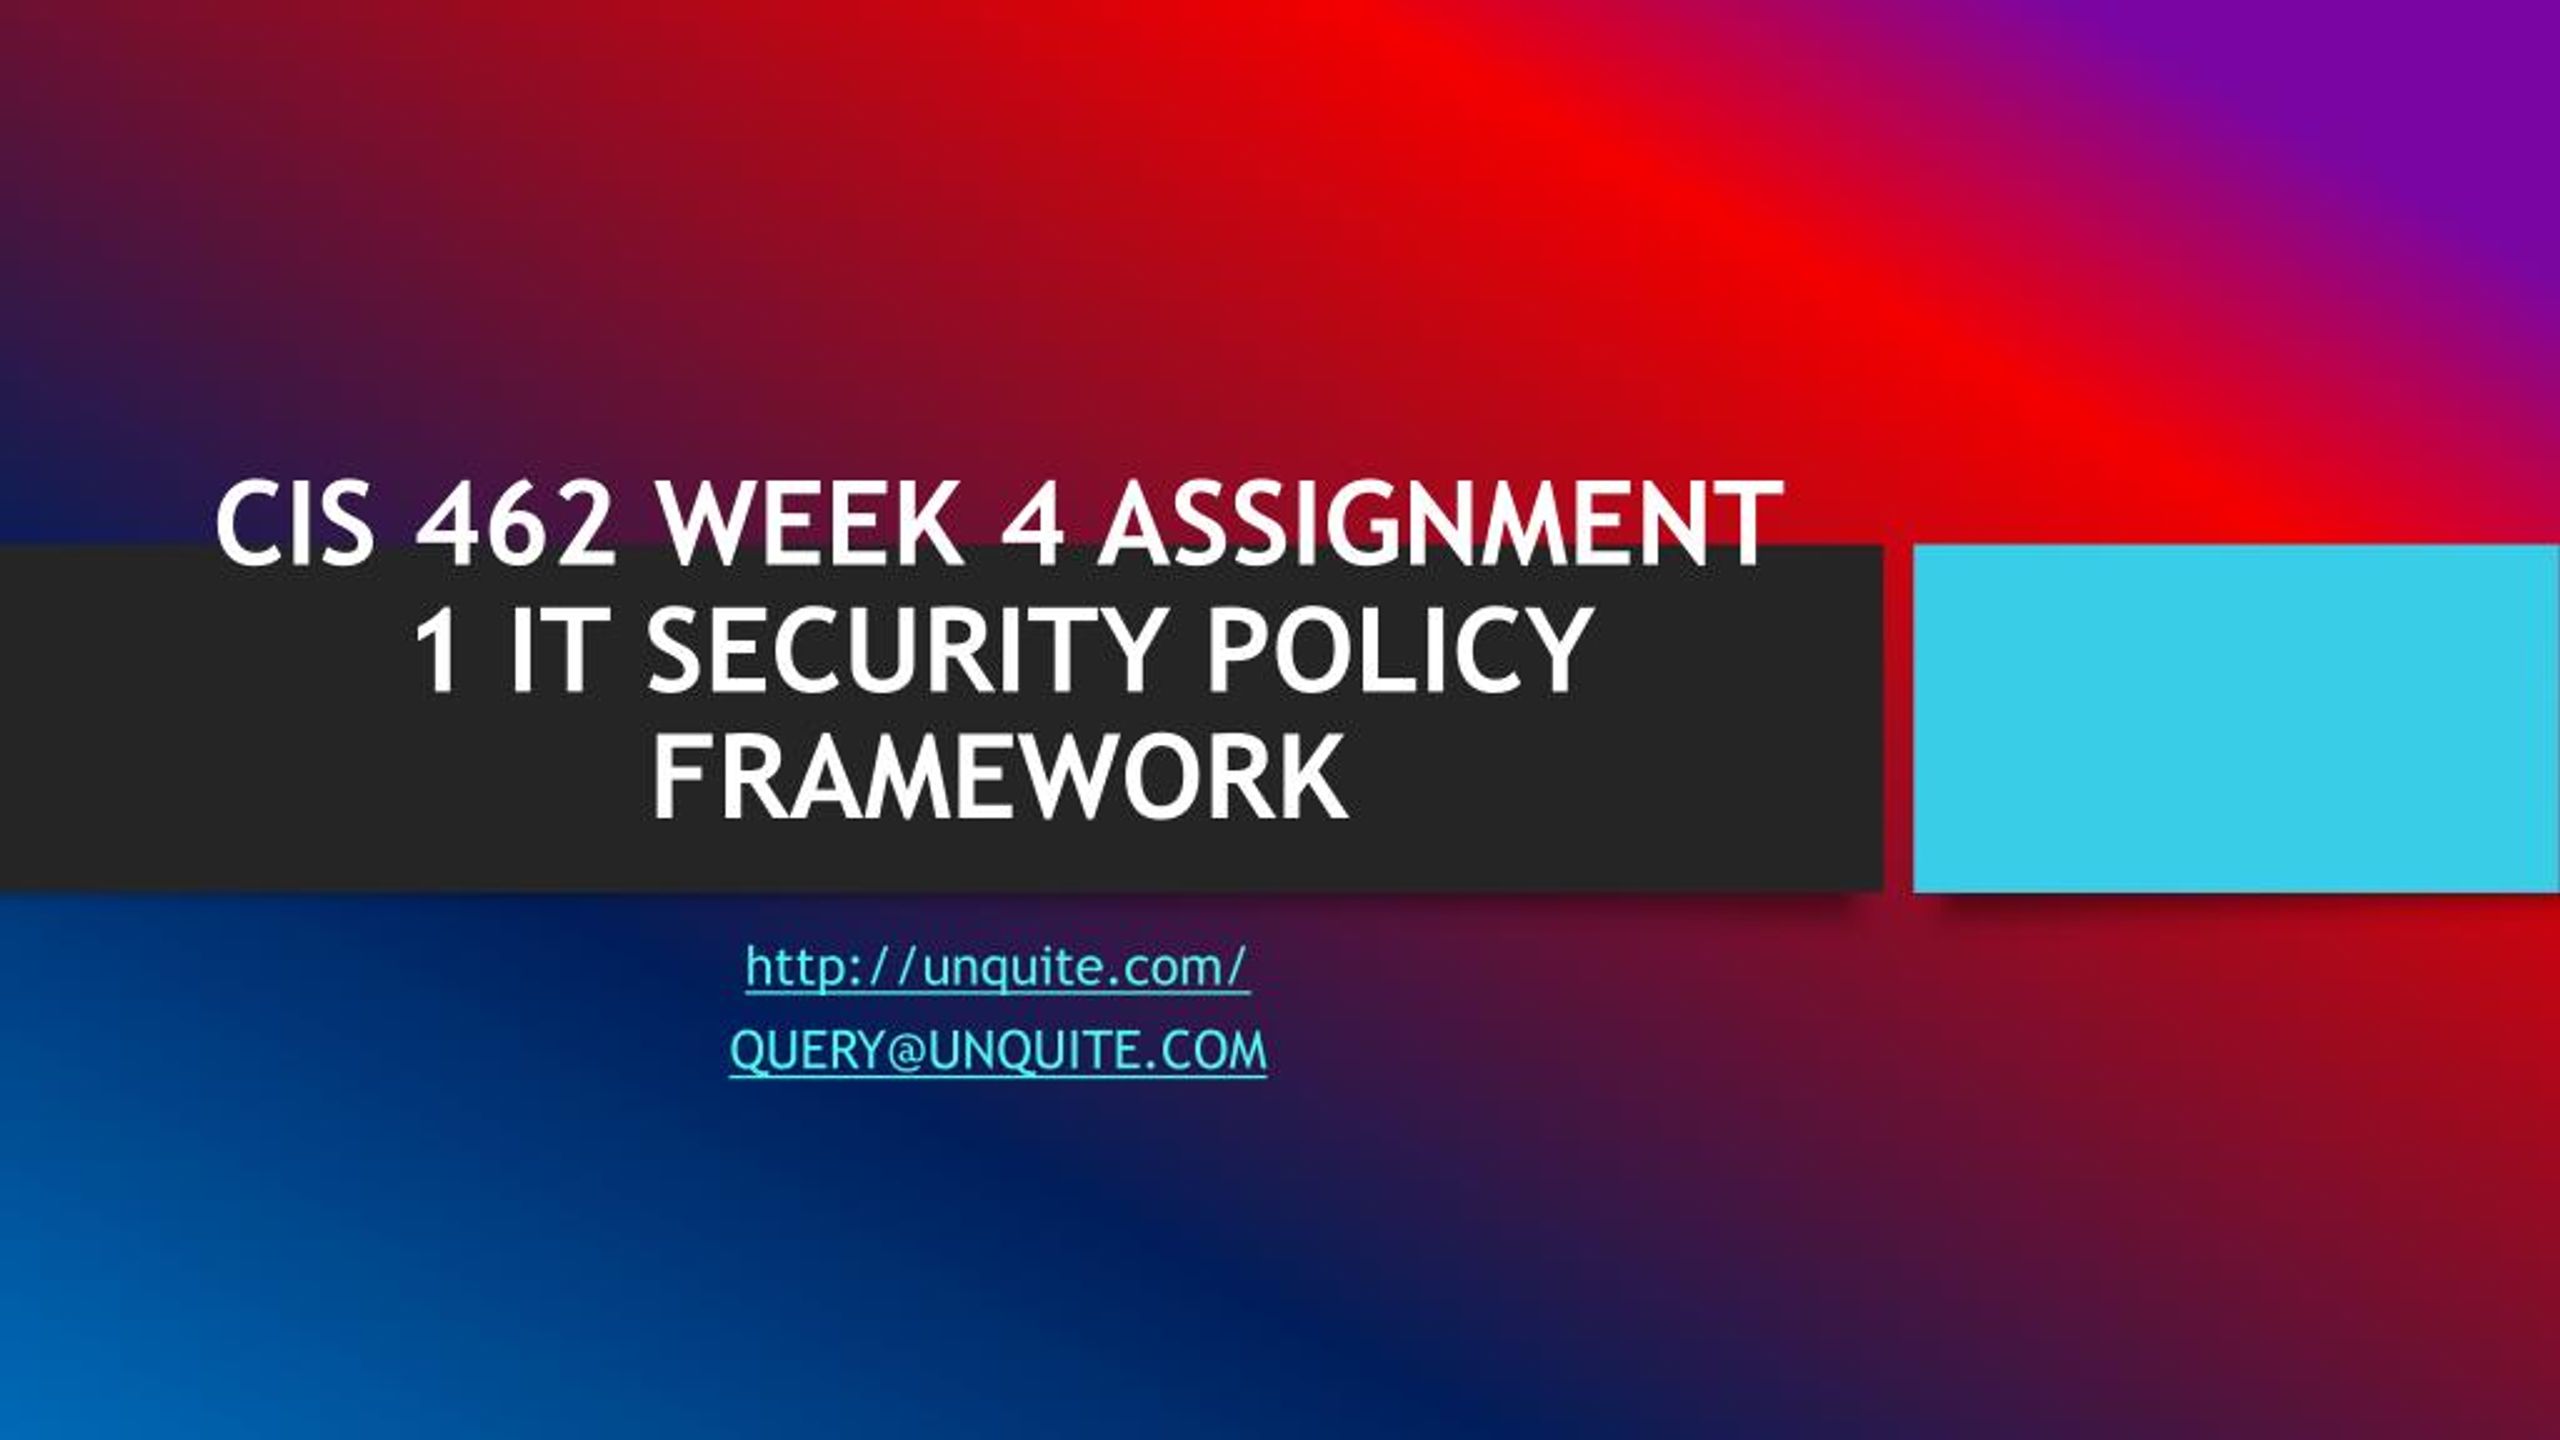 project it security policy framework assignment